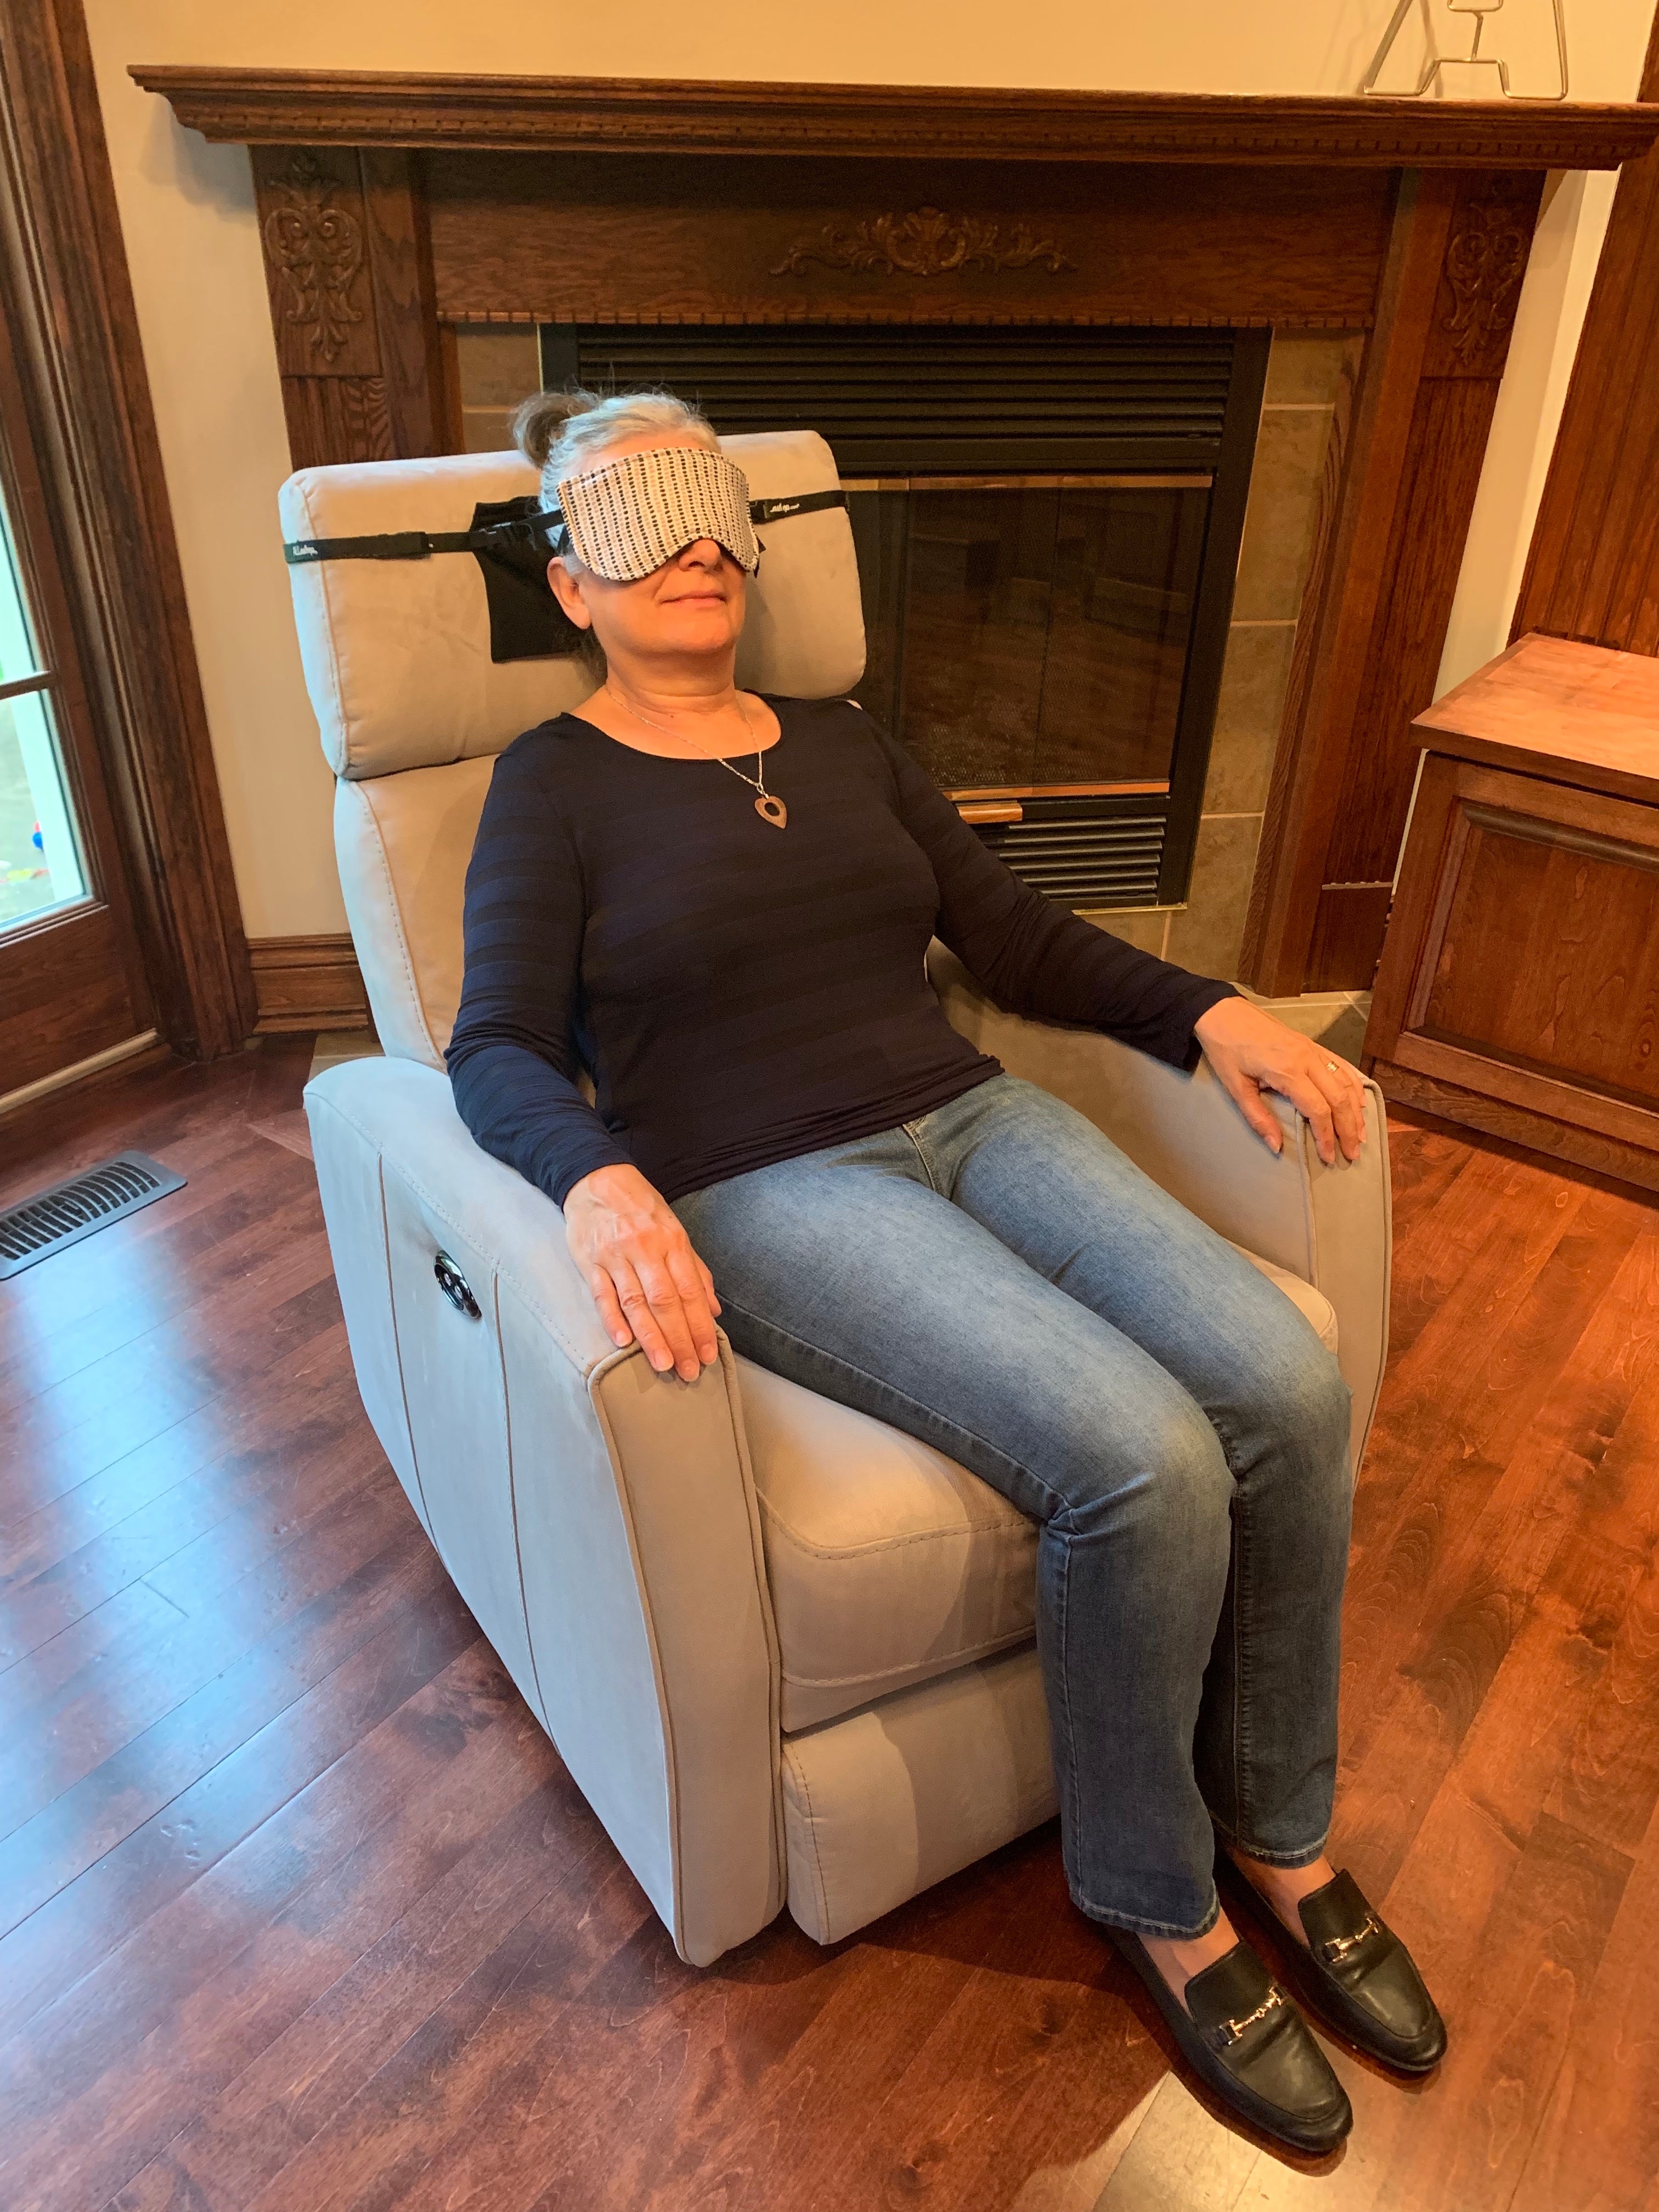 View from afar of a woman sleeping in a recliner style chair with ALLasleep and extension